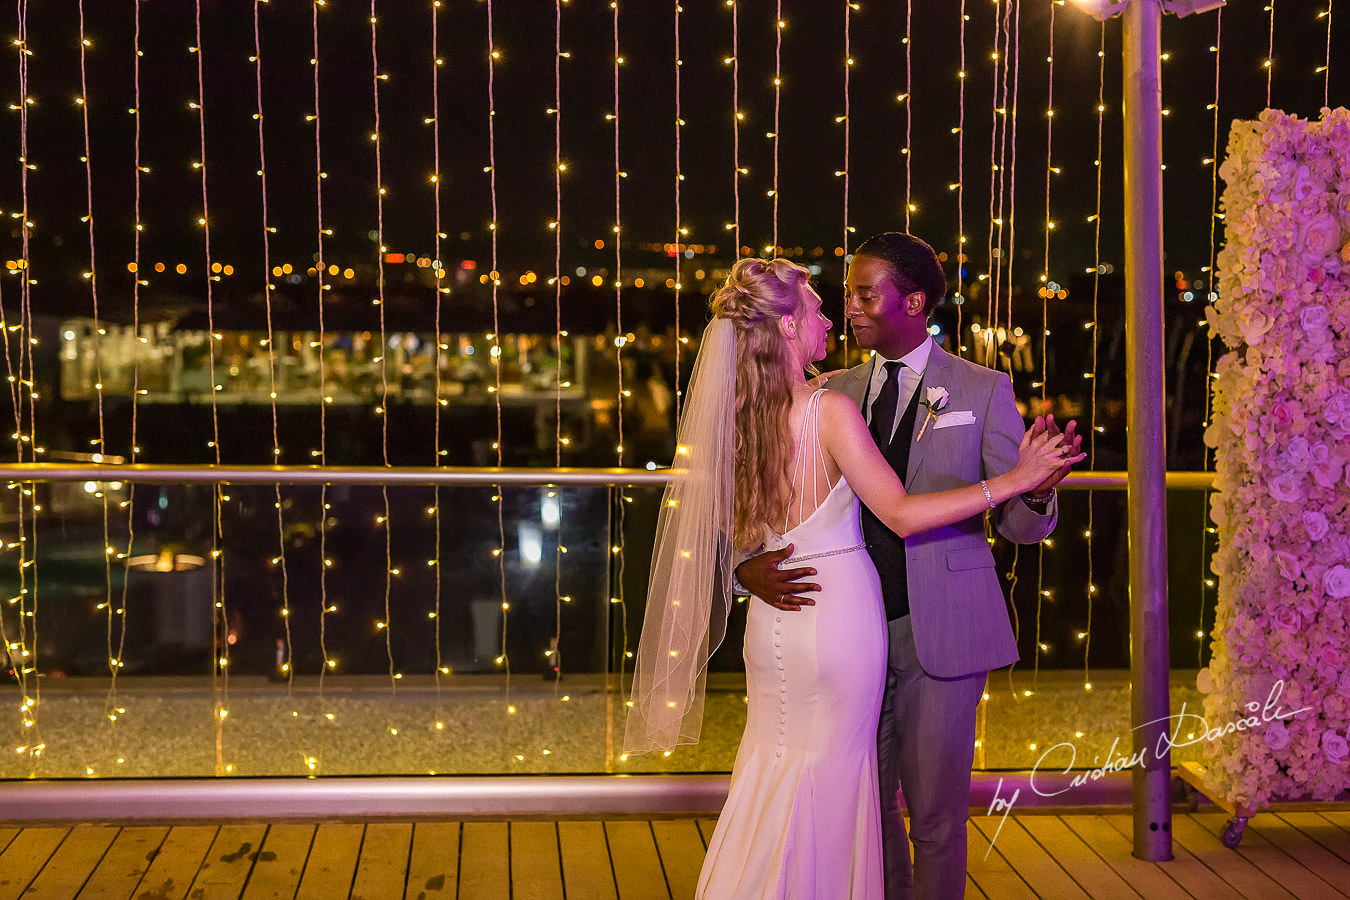 Wedding moments captured at an Exquisite Wedding at Asterias Beach Hotel. Photography by Cyprus Photographer Cristian Dascalu.